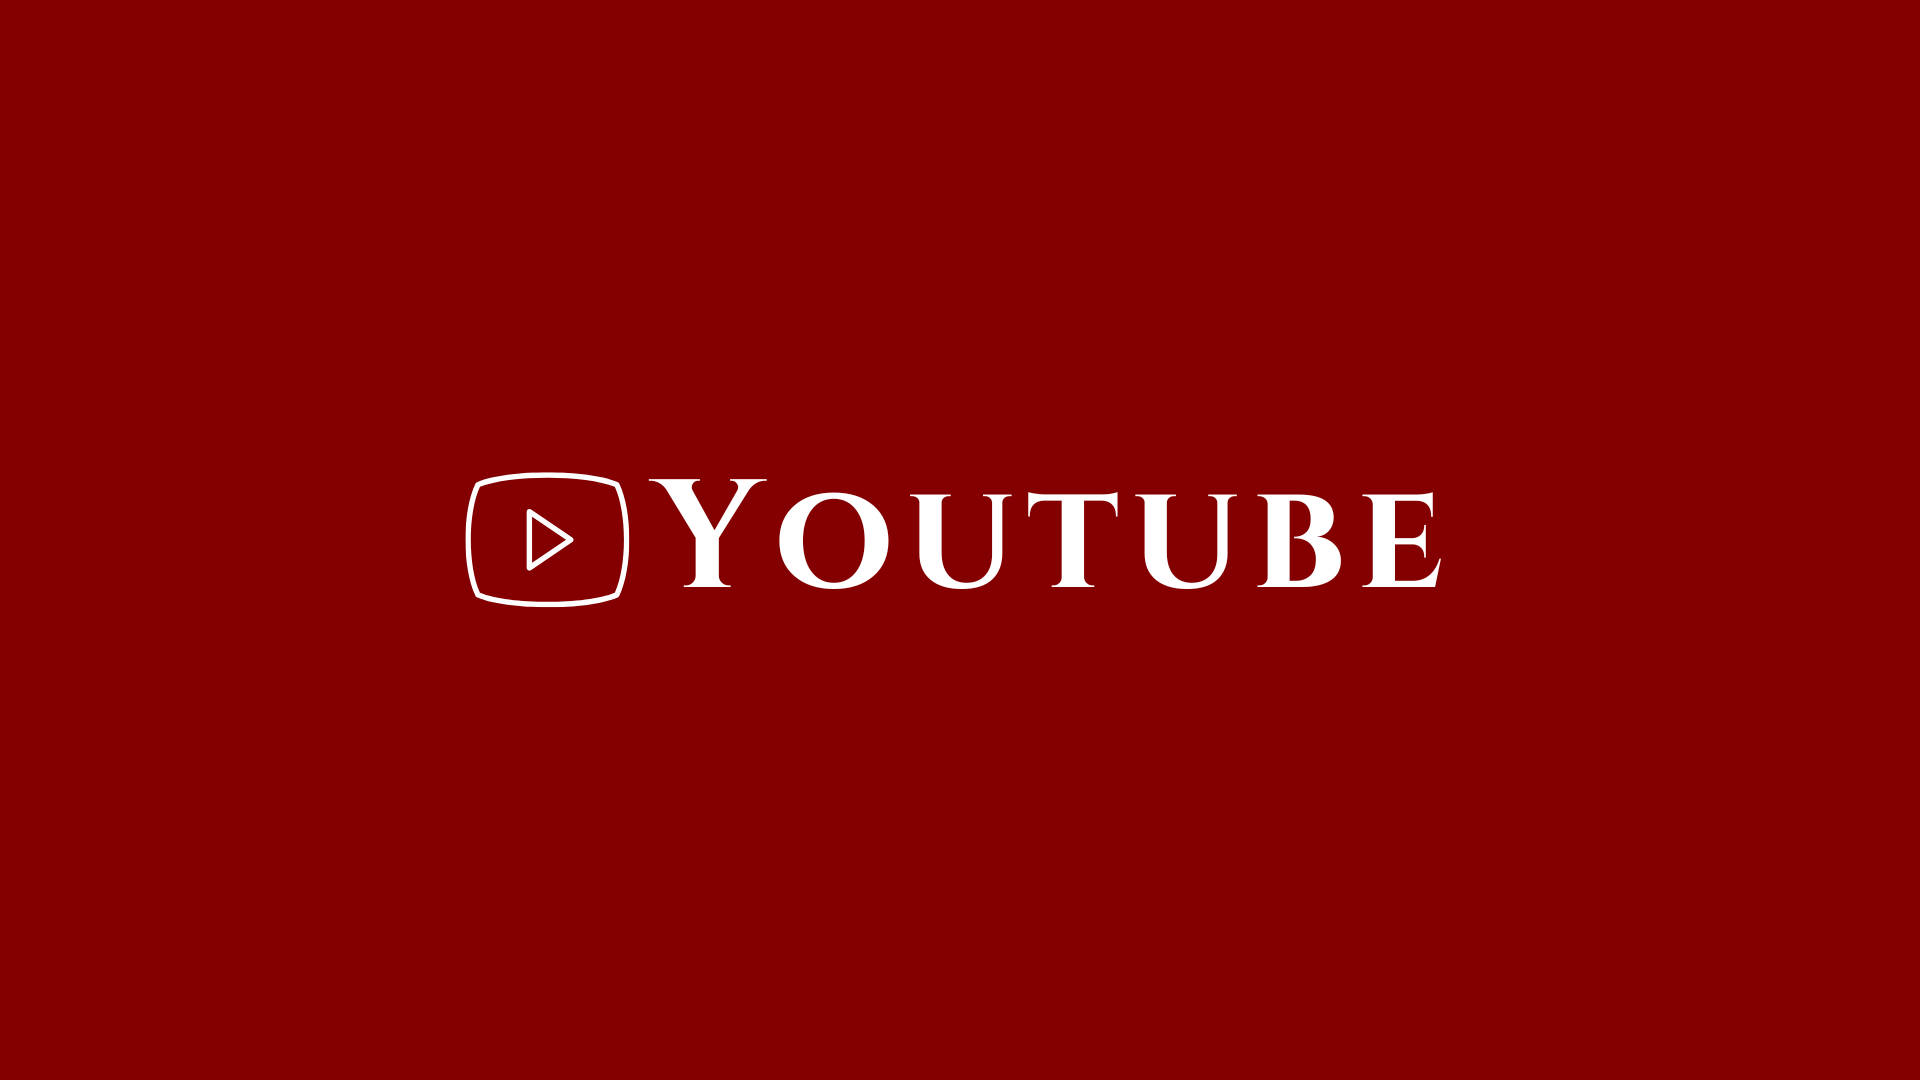 Youtube Logo And Name Deep Red Background